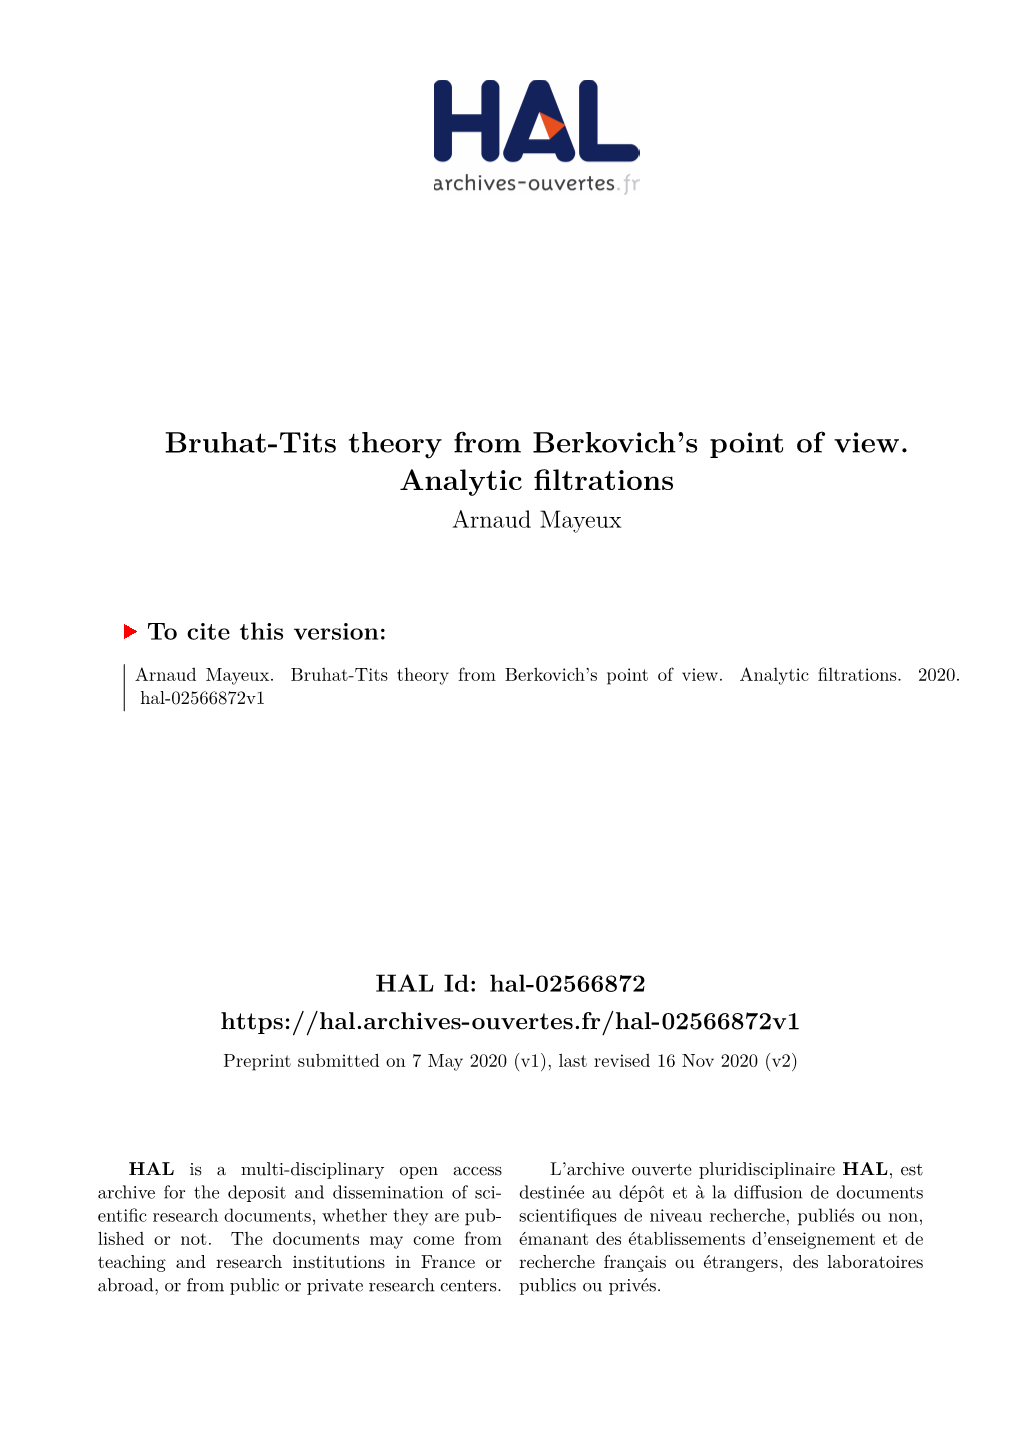 Bruhat-Tits Theory from Berkovich's Point of View. Analytic Filtrations